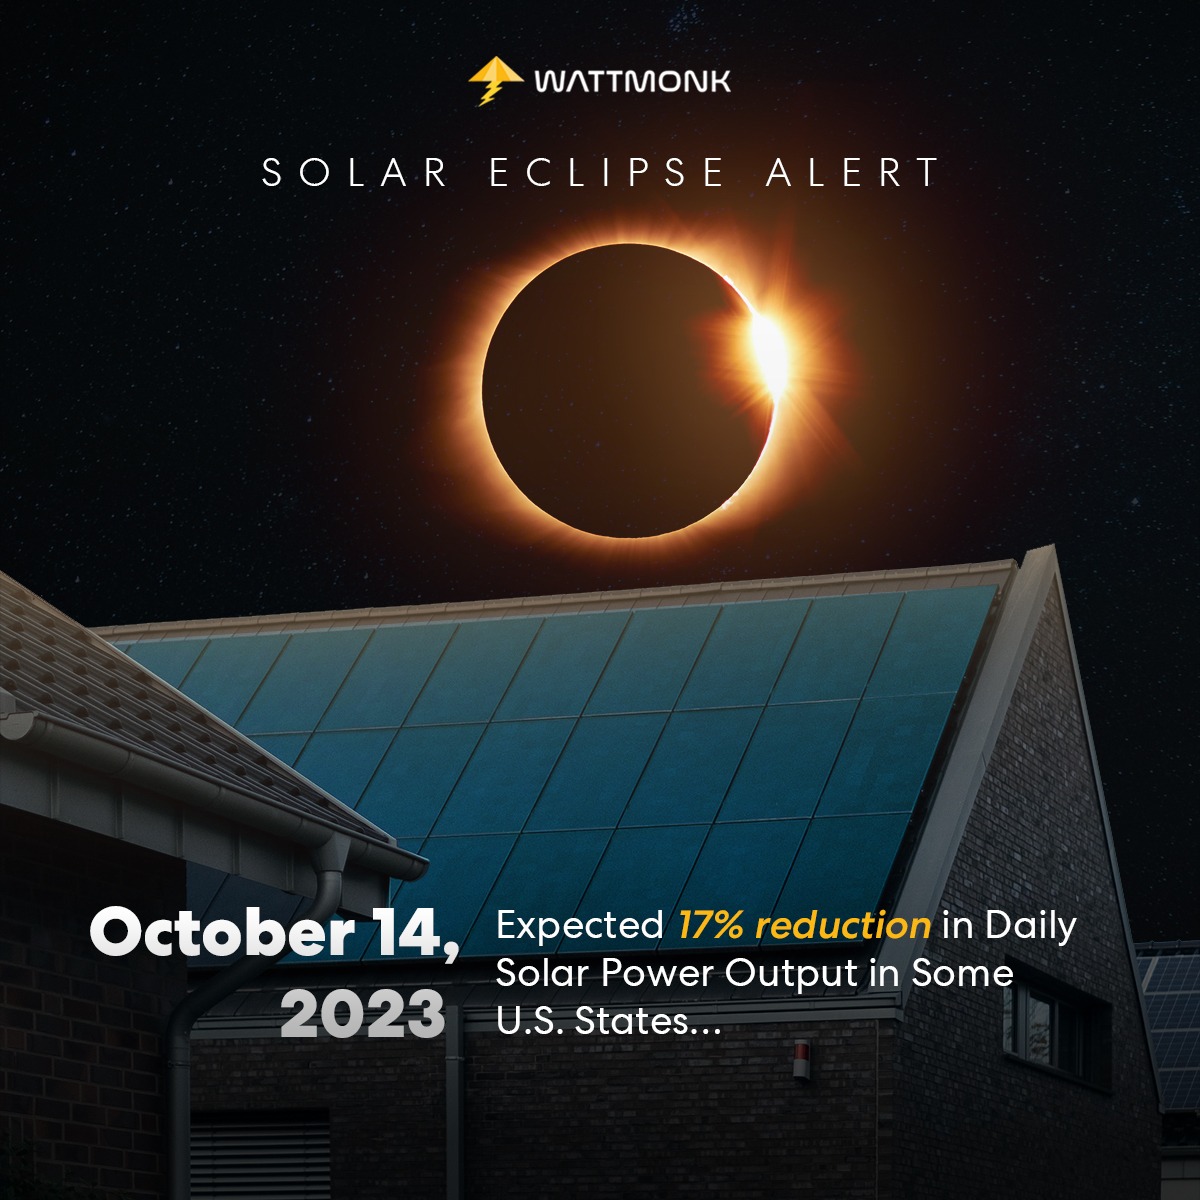 ⚠️All solar users be alerted⚠️

Upcoming Solar Eclipse can impact on your daily solar power output...

#solarpower #solareclipse #solaralert #solarfacts #solarenergy #solar #solarindustry #renewableenergy #renewables #UpcomingEvent #solarevents